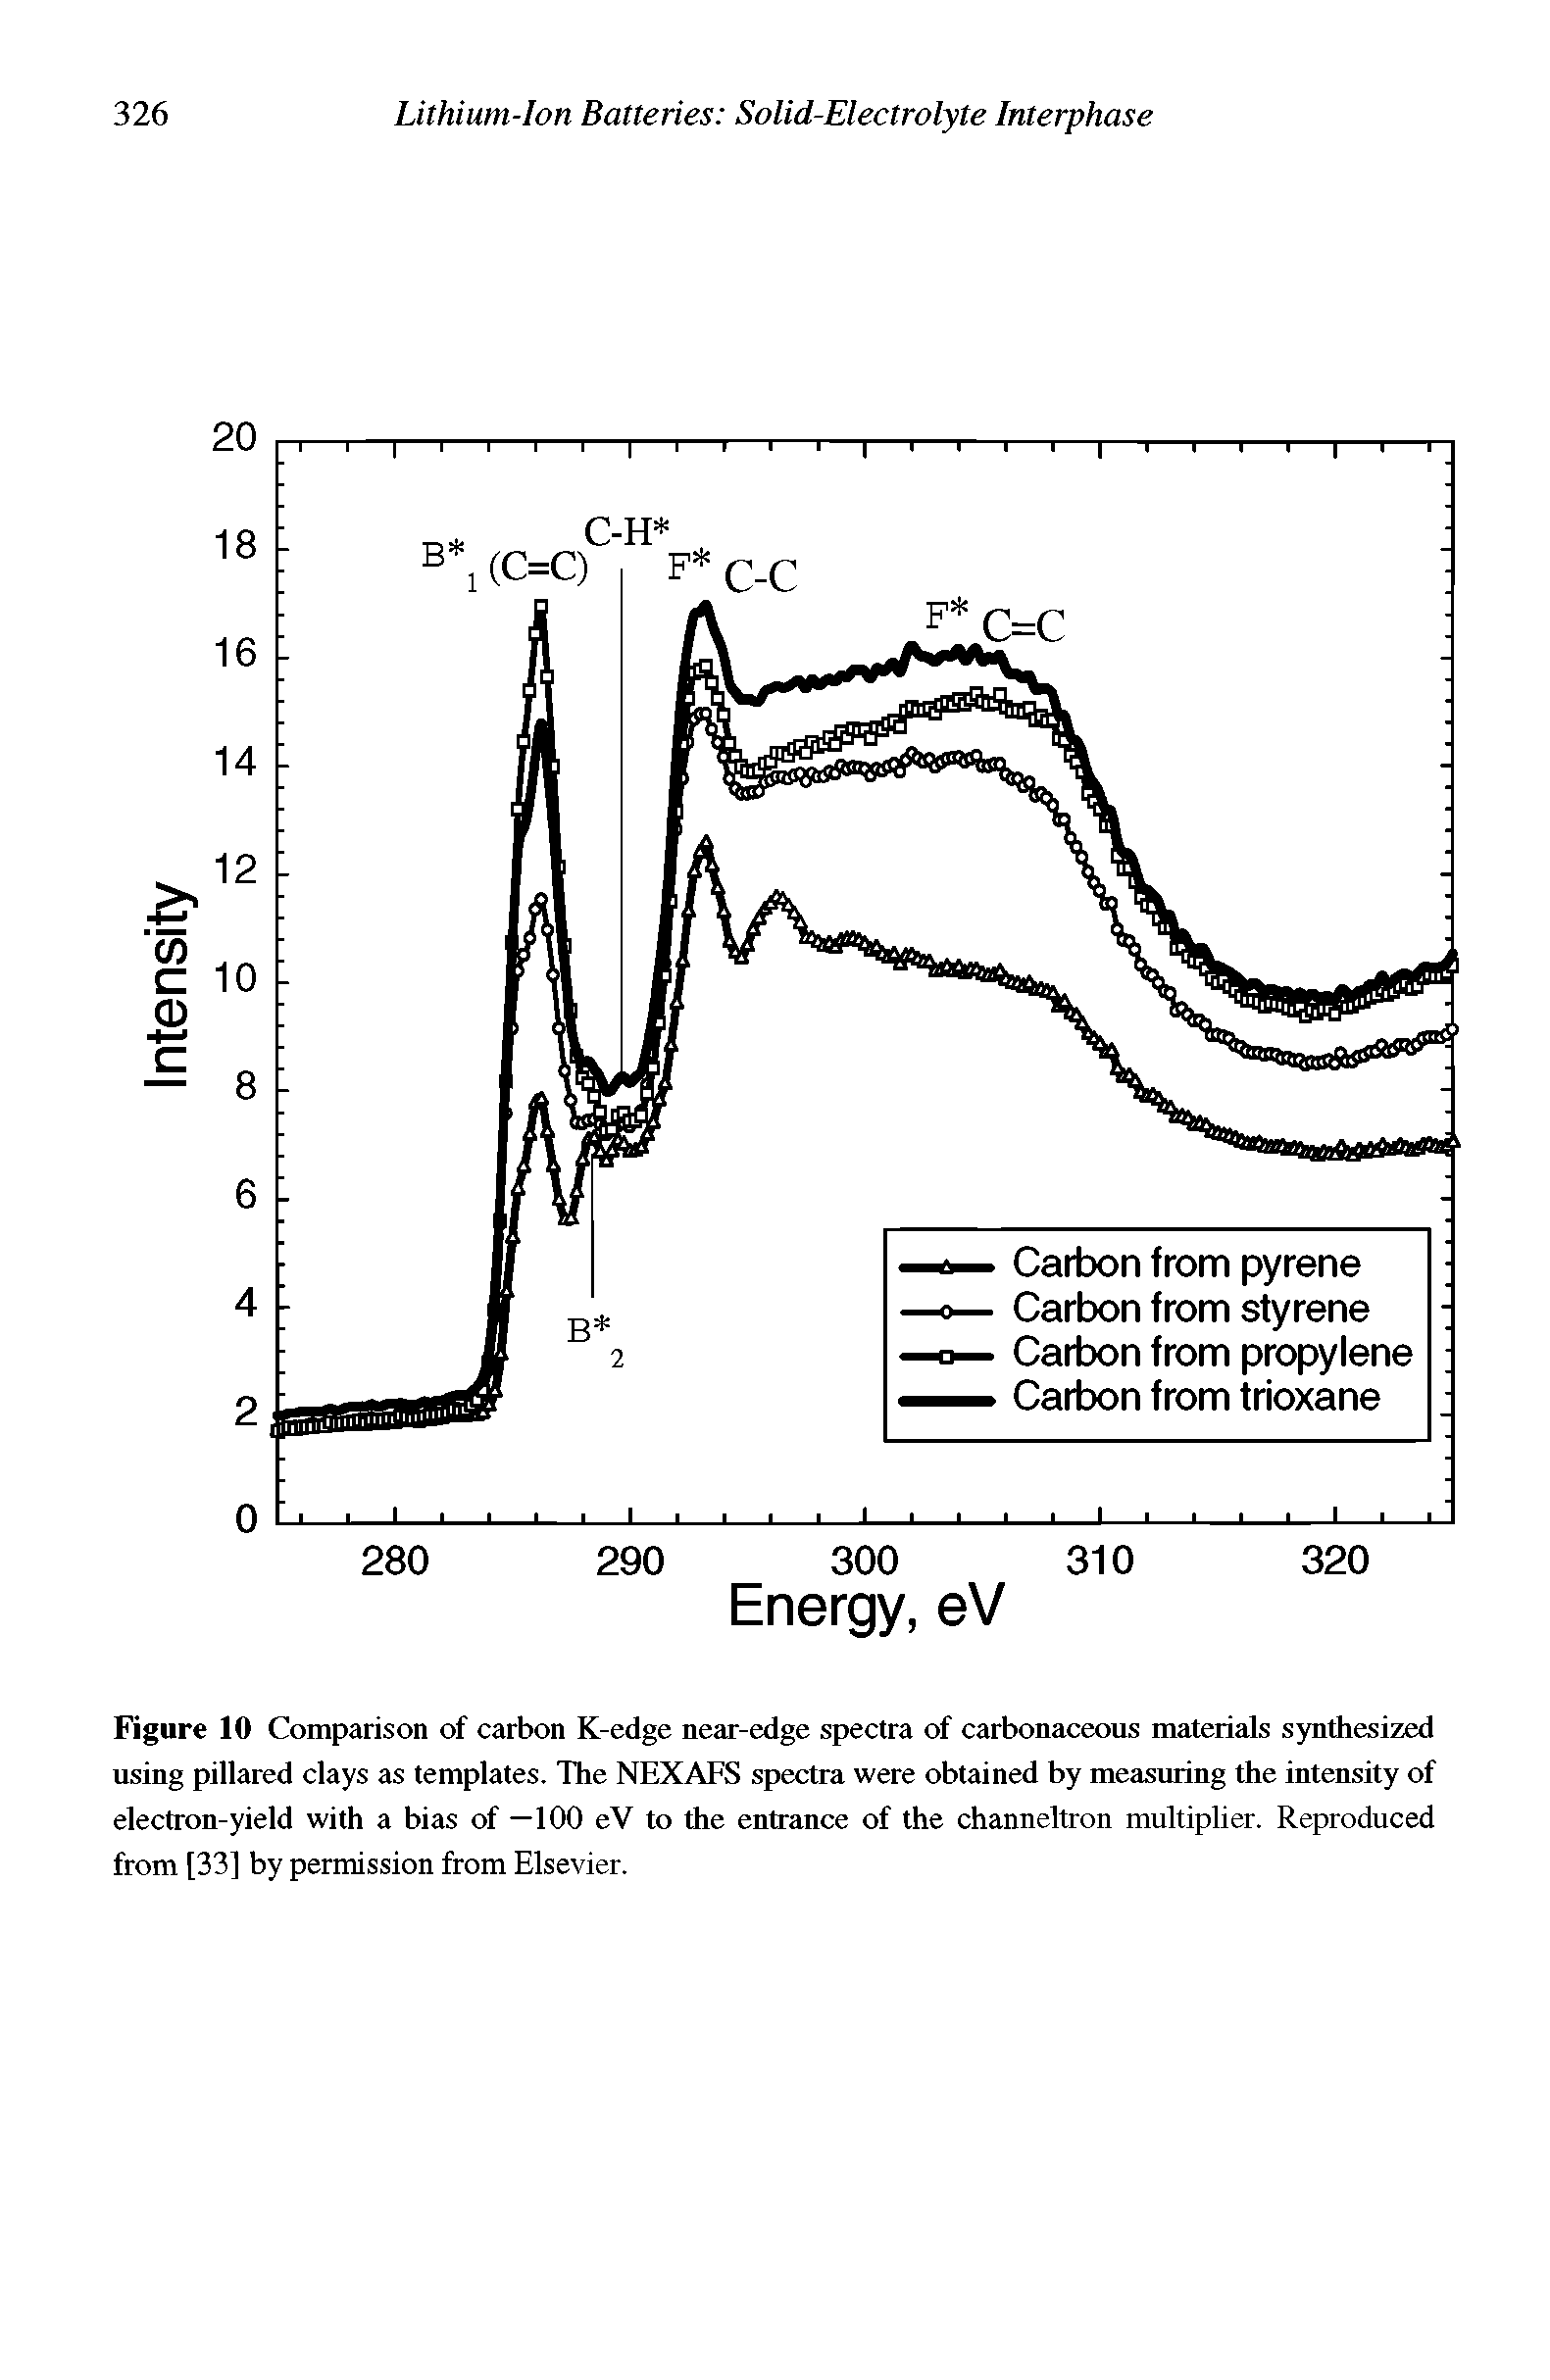 Figure 10 Comparison of carbon K-edge near-edge spectra of carbonaceous materials synthesized using pillared clays as templates. The NEXAFS spectra were obtained by measuring the intensity of electron-yield with a bias of —100 eV to the entrance of the channeltron multiplier. Reproduced from [33] by permission from Elsevier.